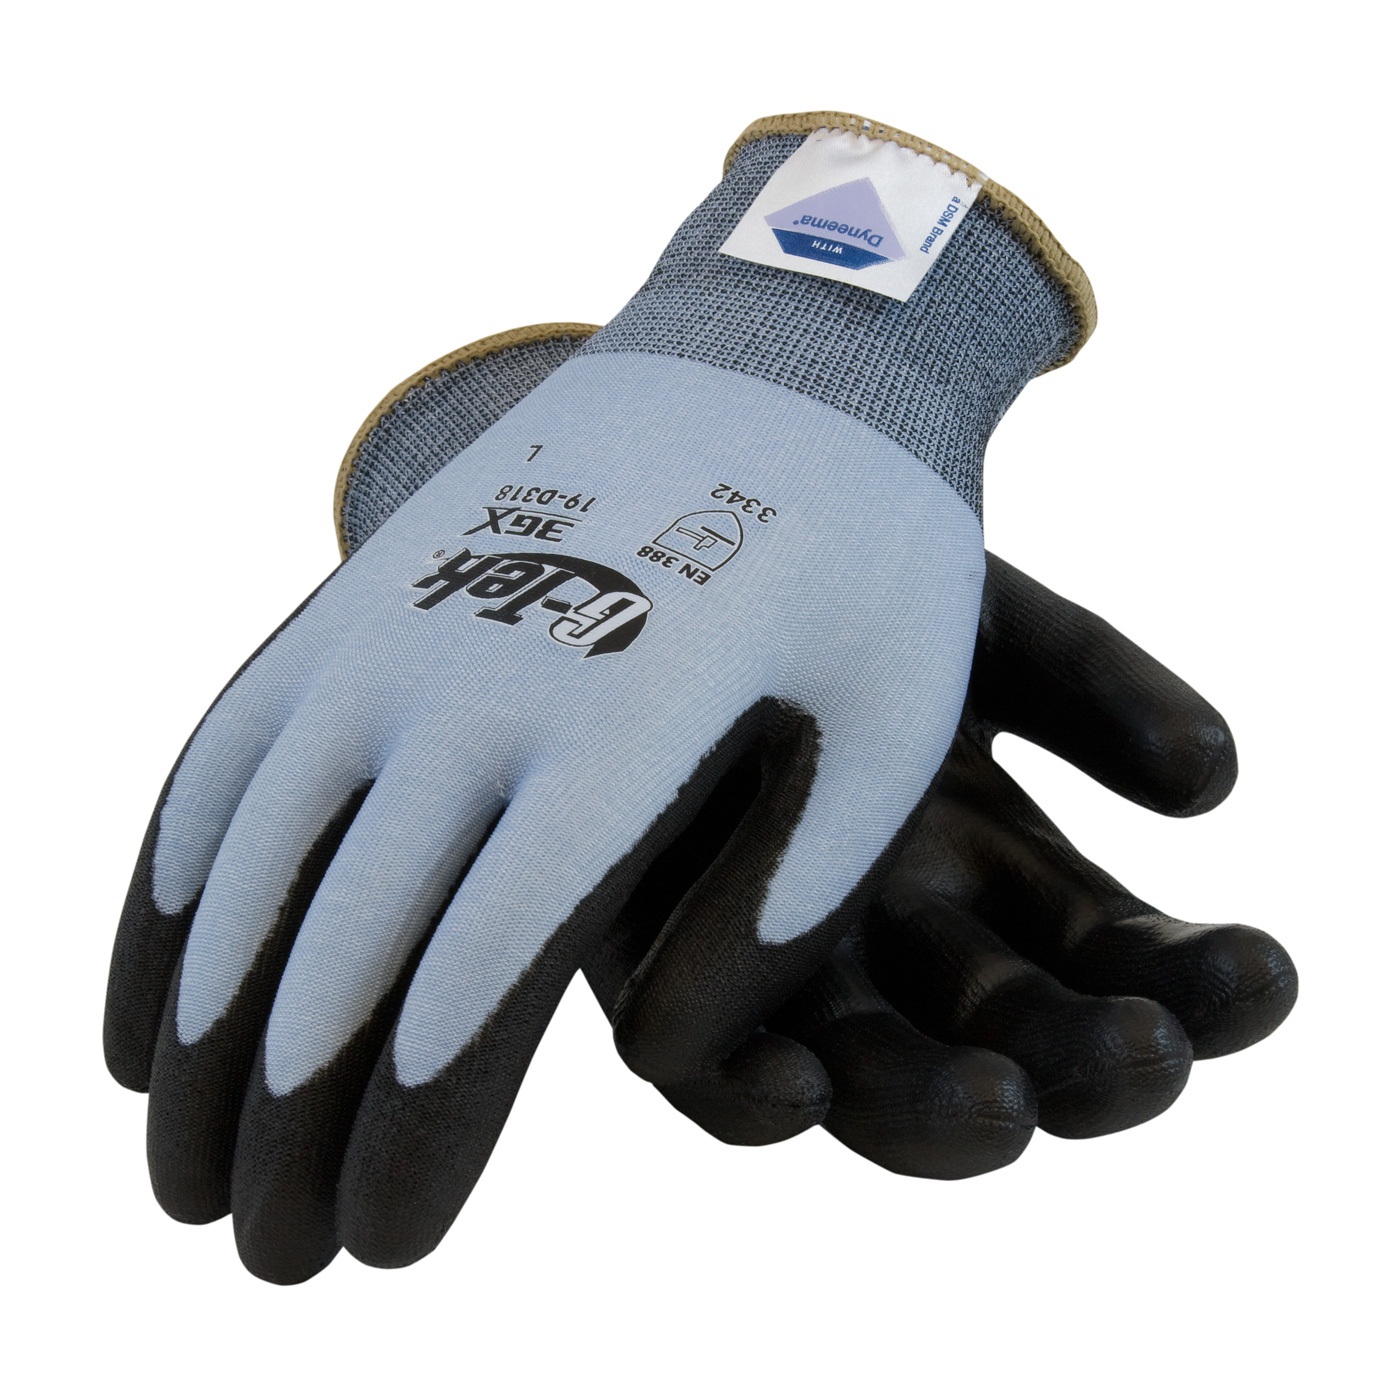 G-Tek 19-D318 Diamond Technology Gloves With Dyneema, 12 Pairs from GME Supply